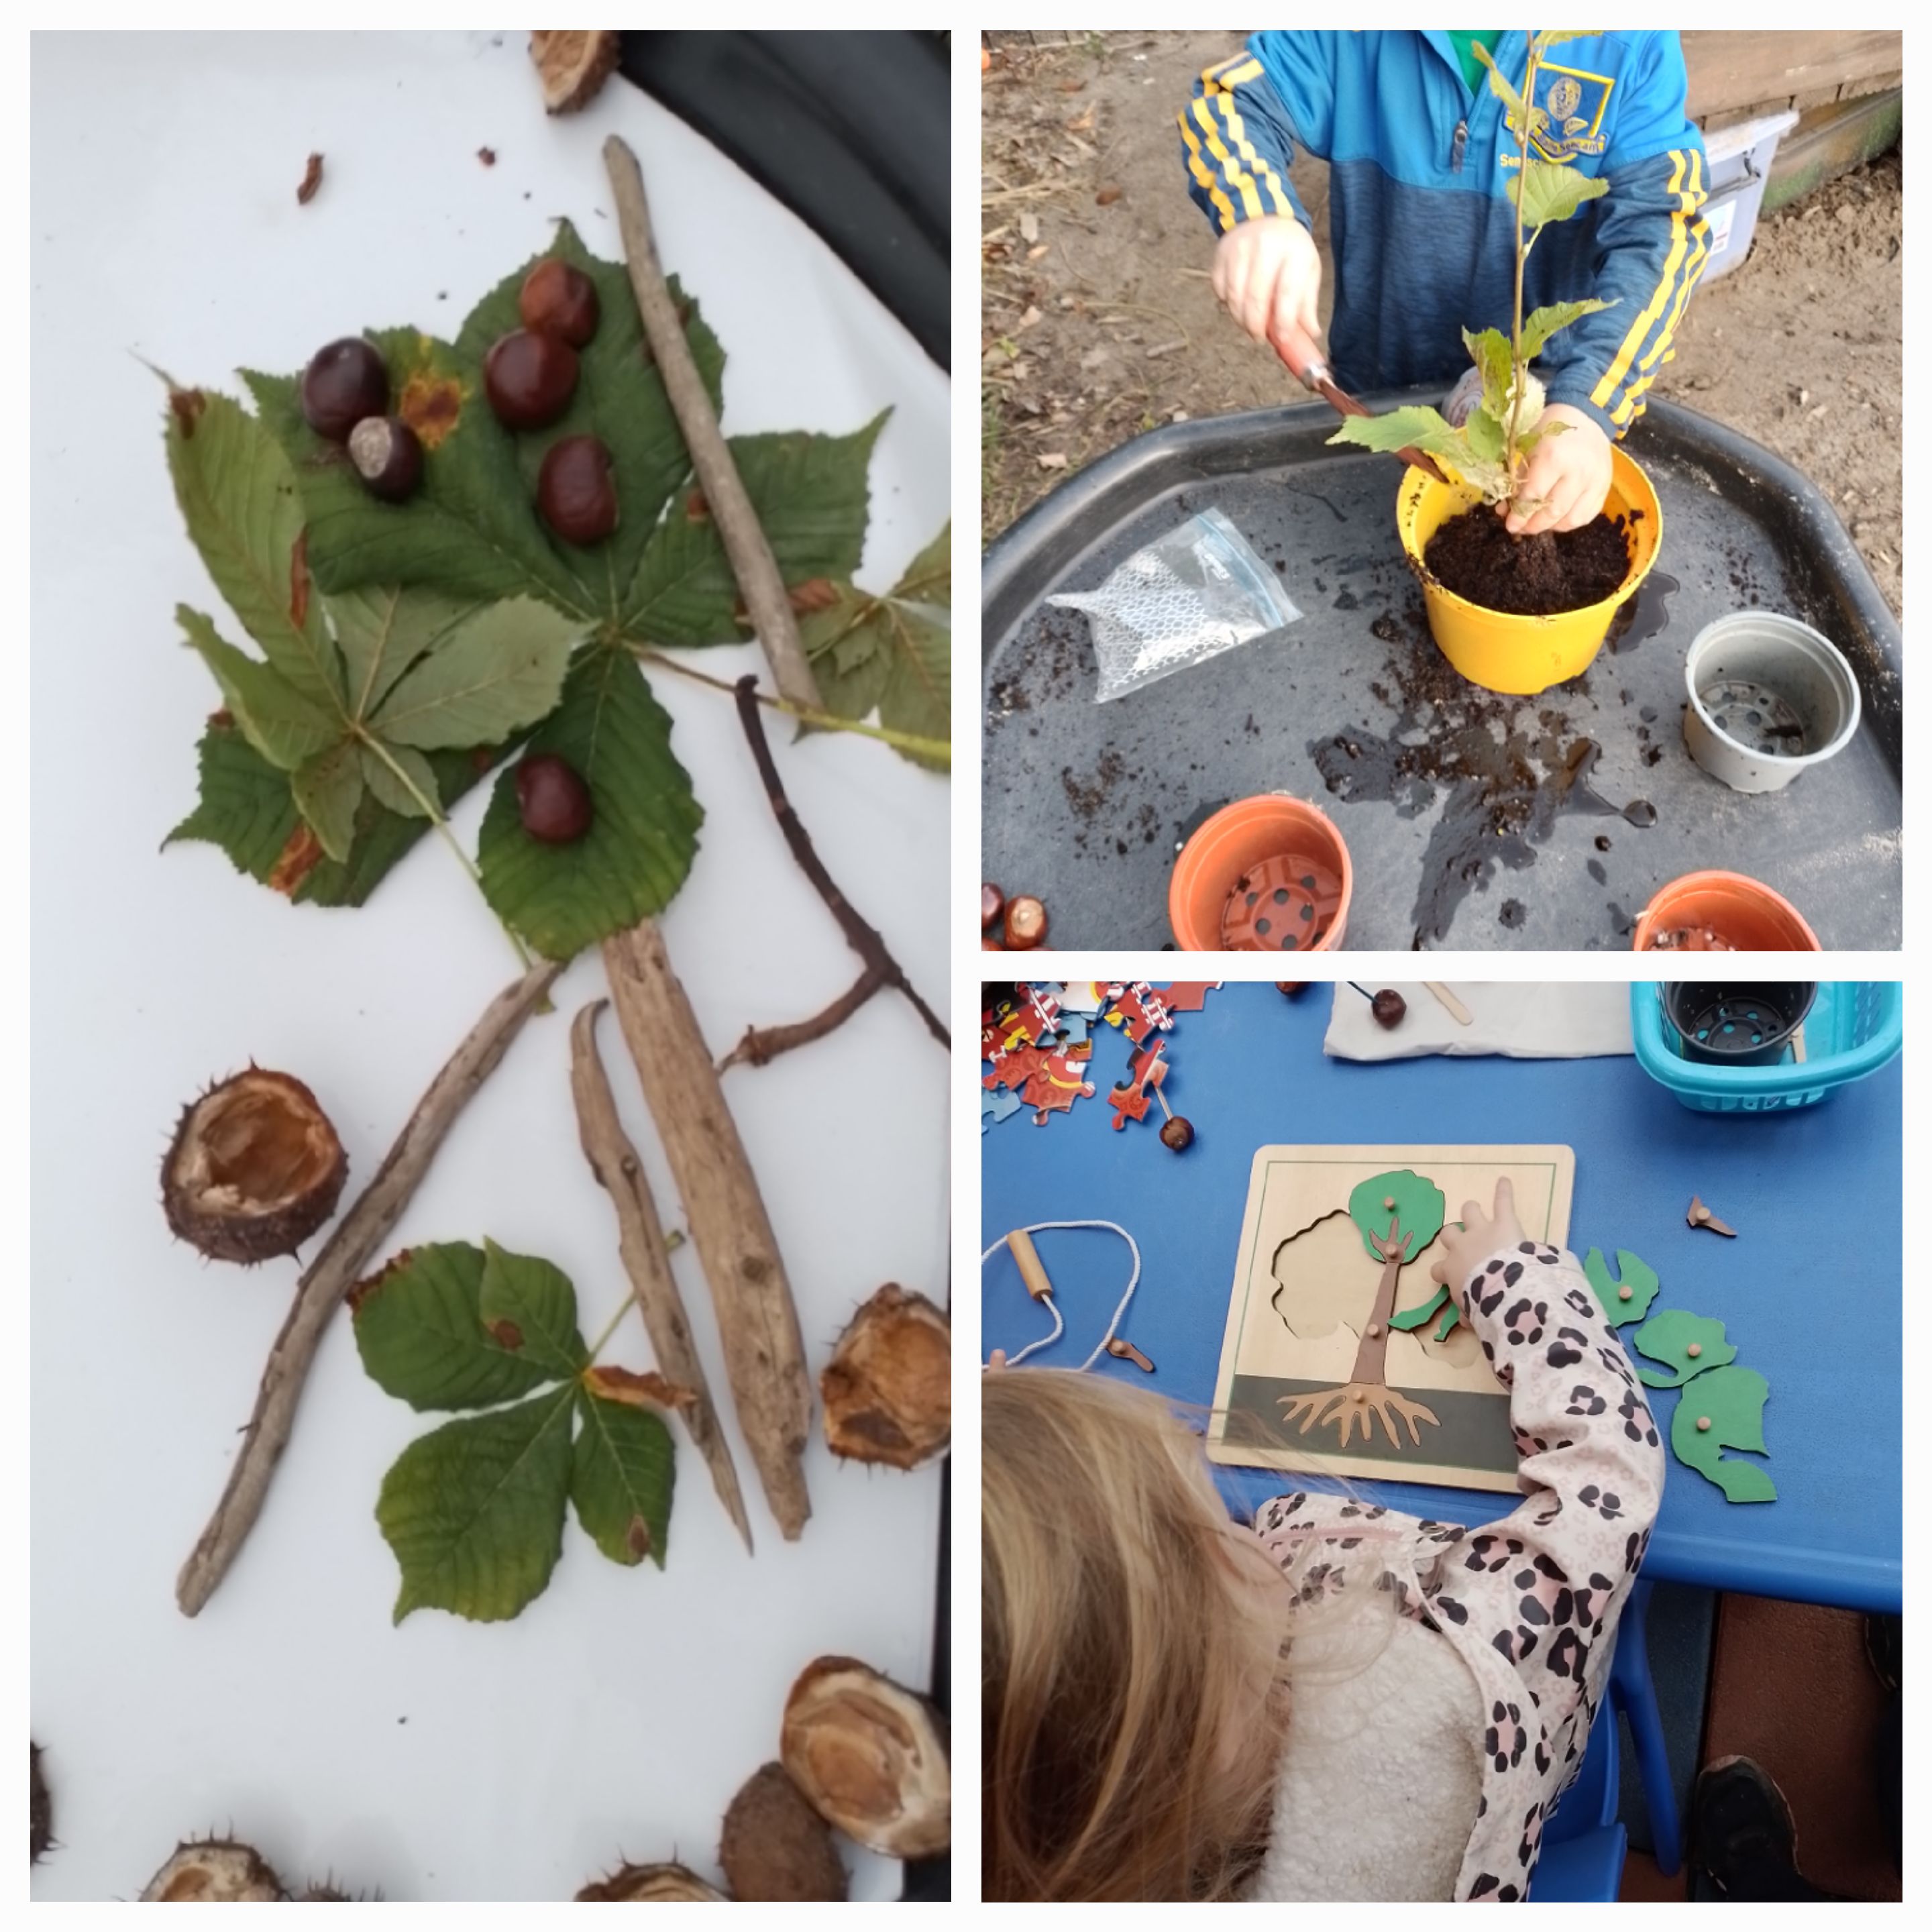 Planting and exploring